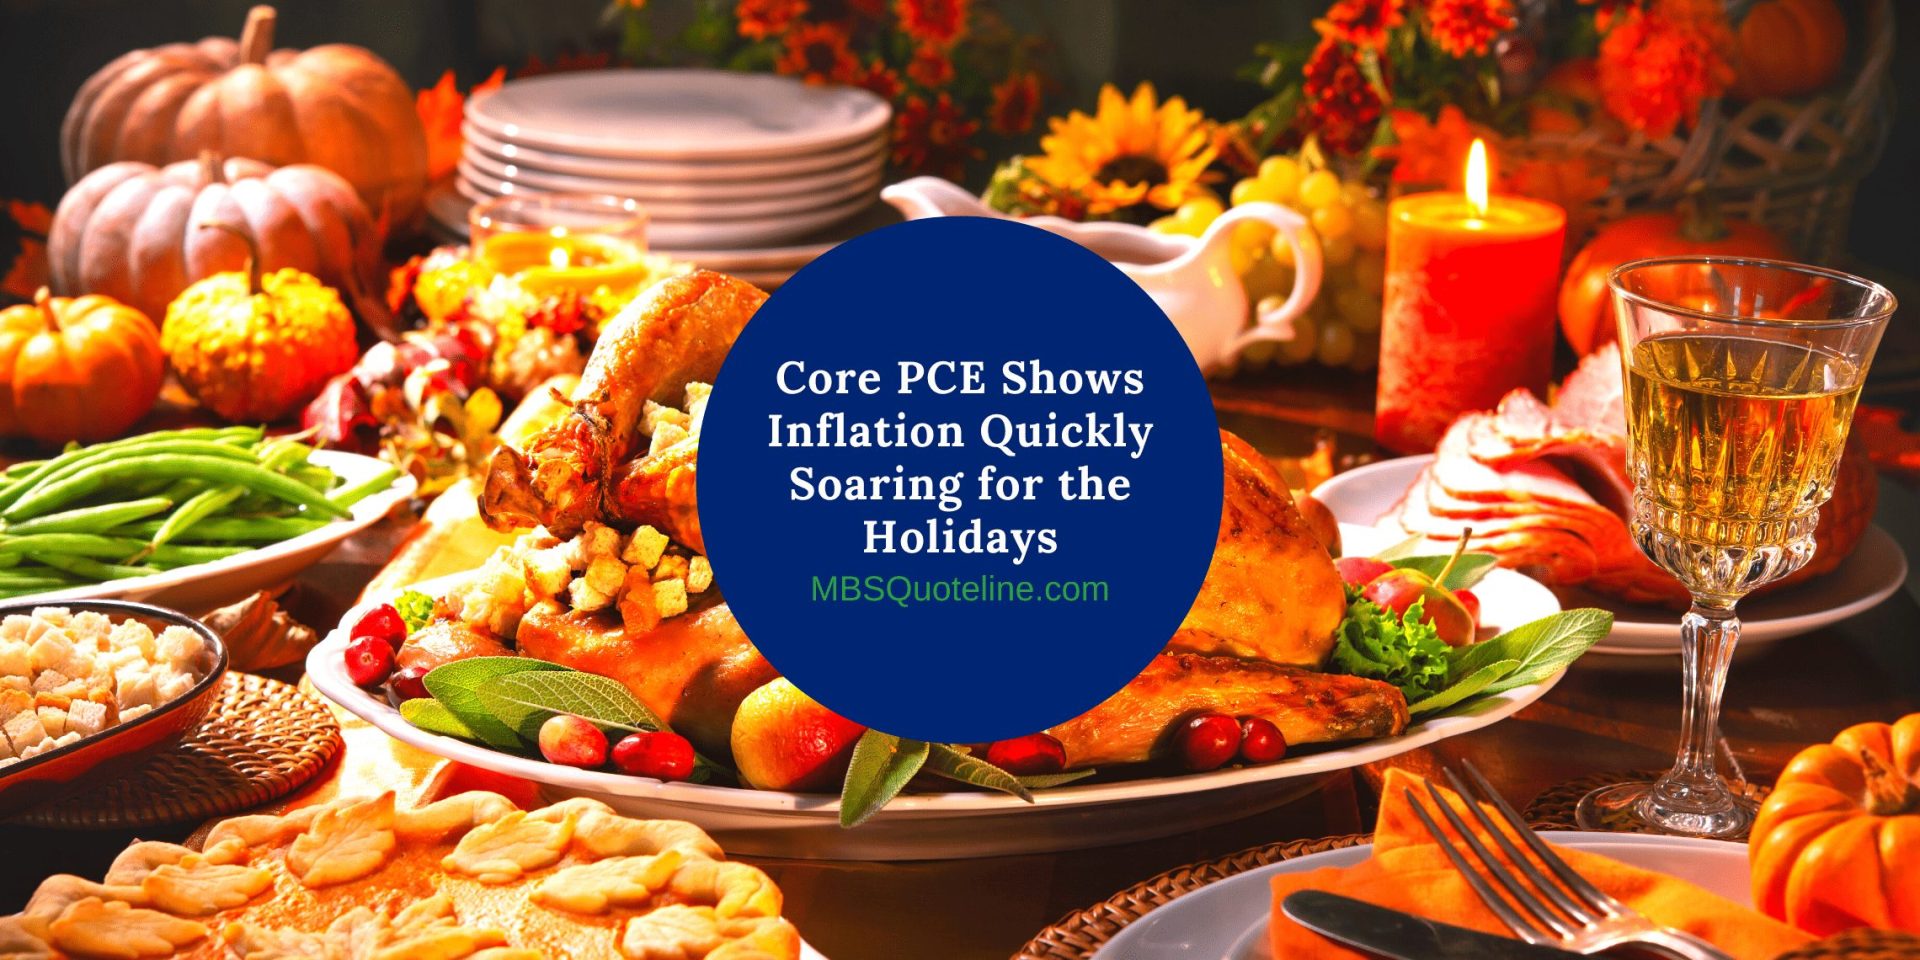 core pce shows inflation mortgagetime mbsquoteline featured